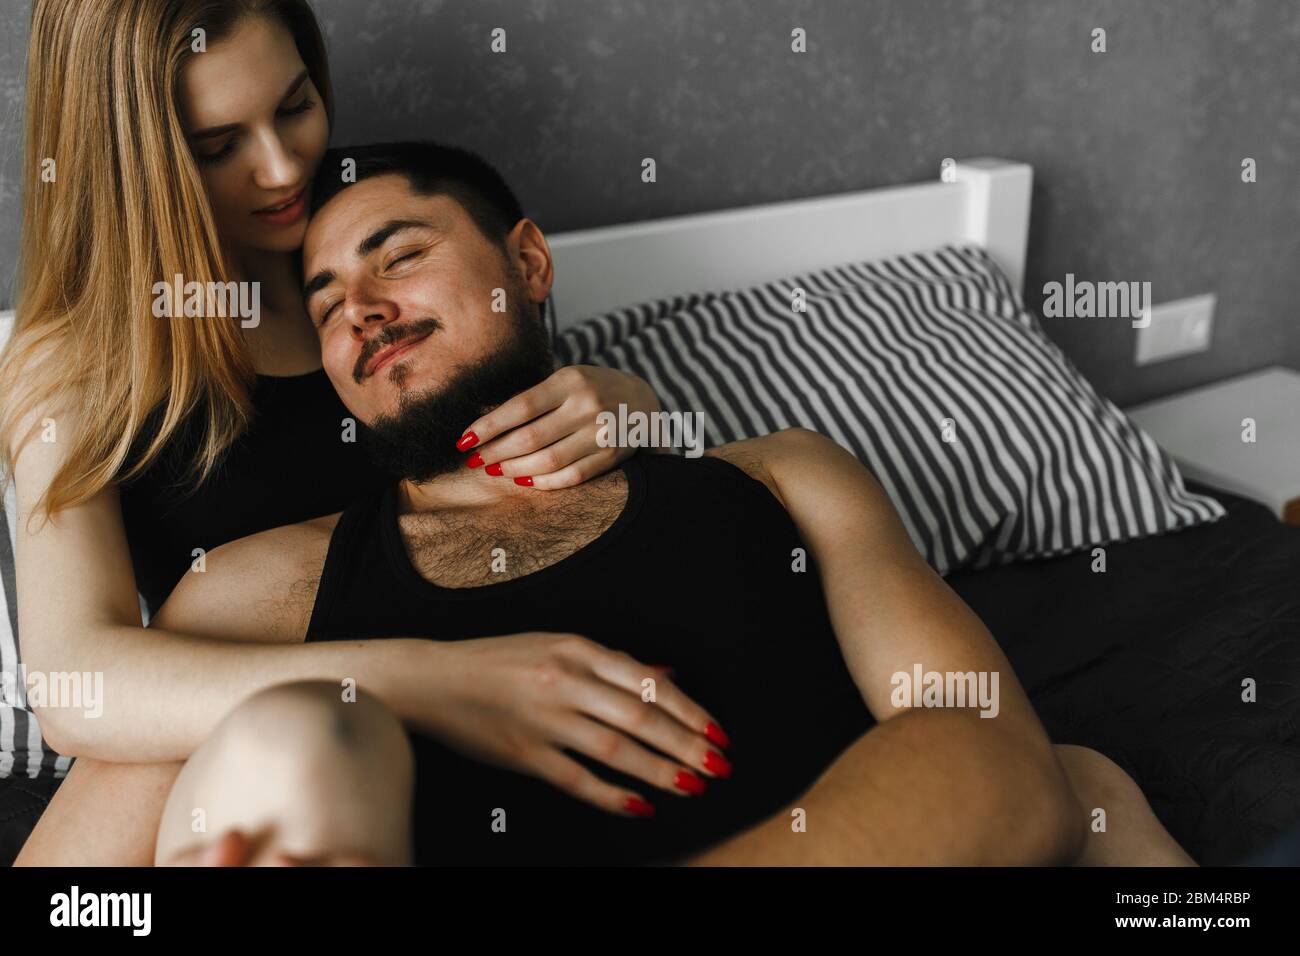 Man feeling happiness while her woman embracing him. Stay home Stock Photo